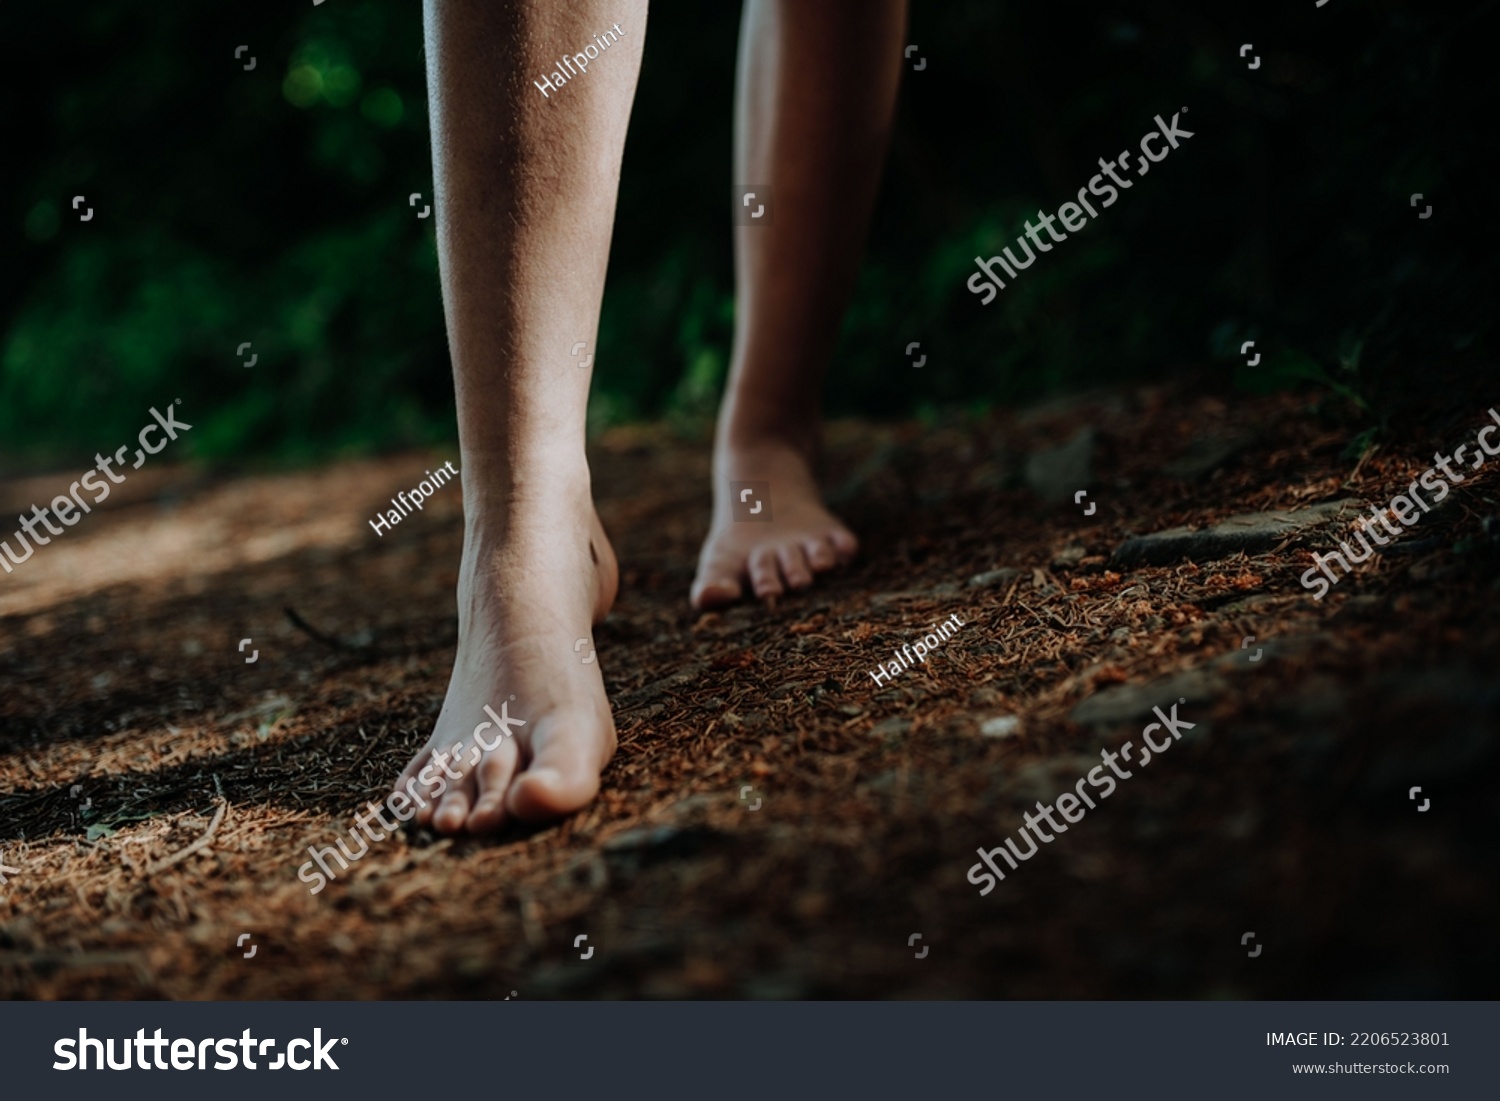 Close-up of barefoot legs walking in nature. Concept of healthy feet. #2206523801